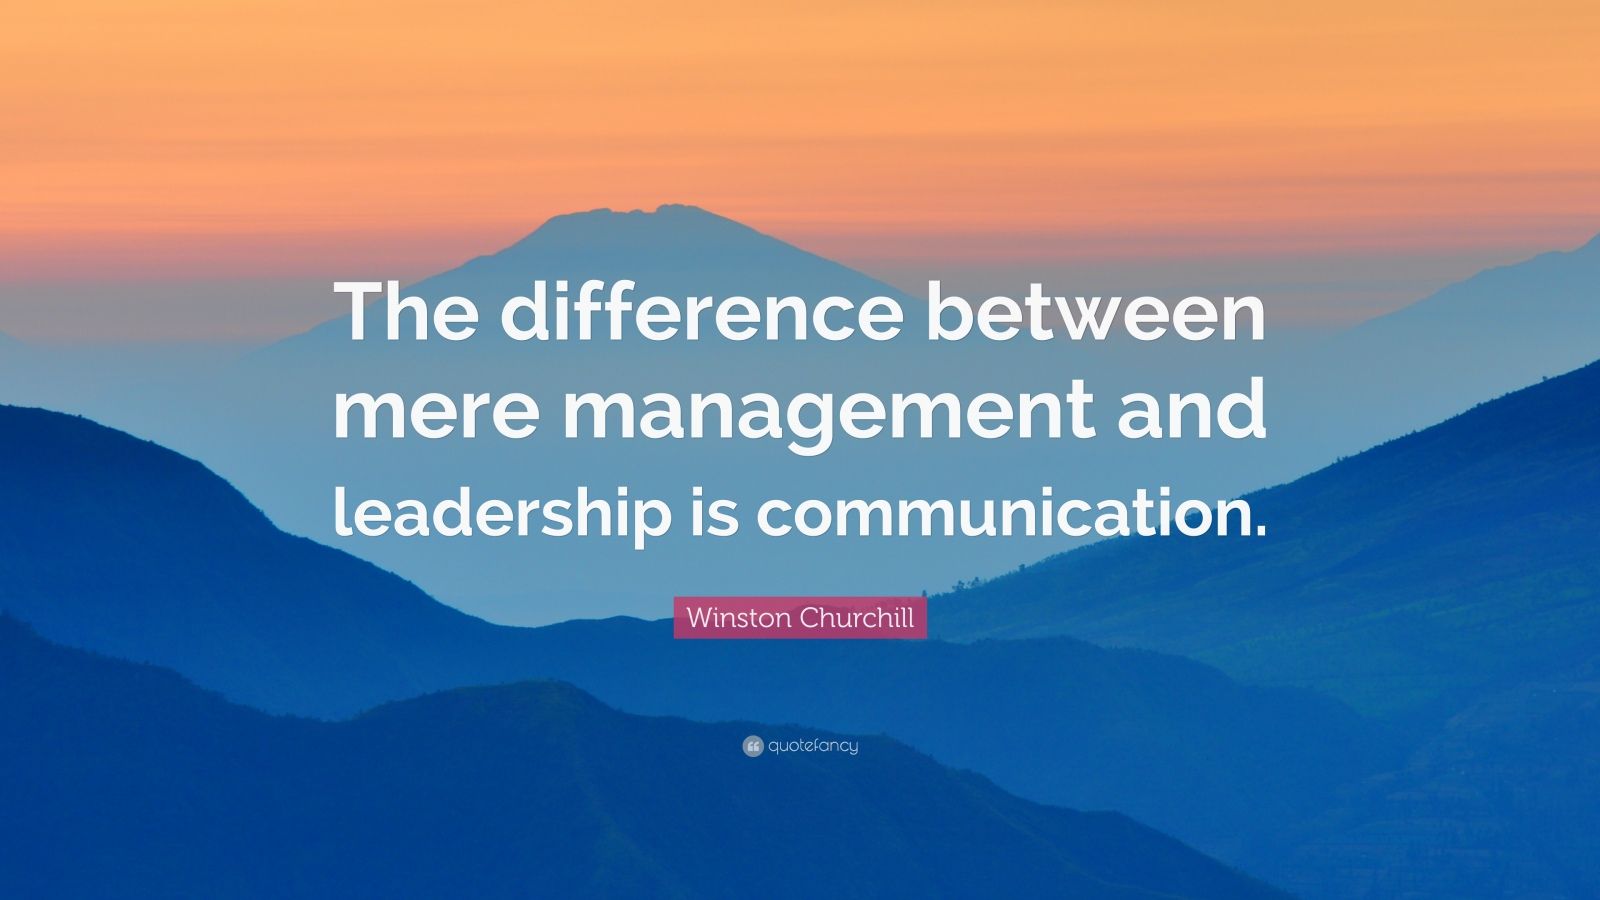 Winston Churchill Quote: “The difference between mere management and